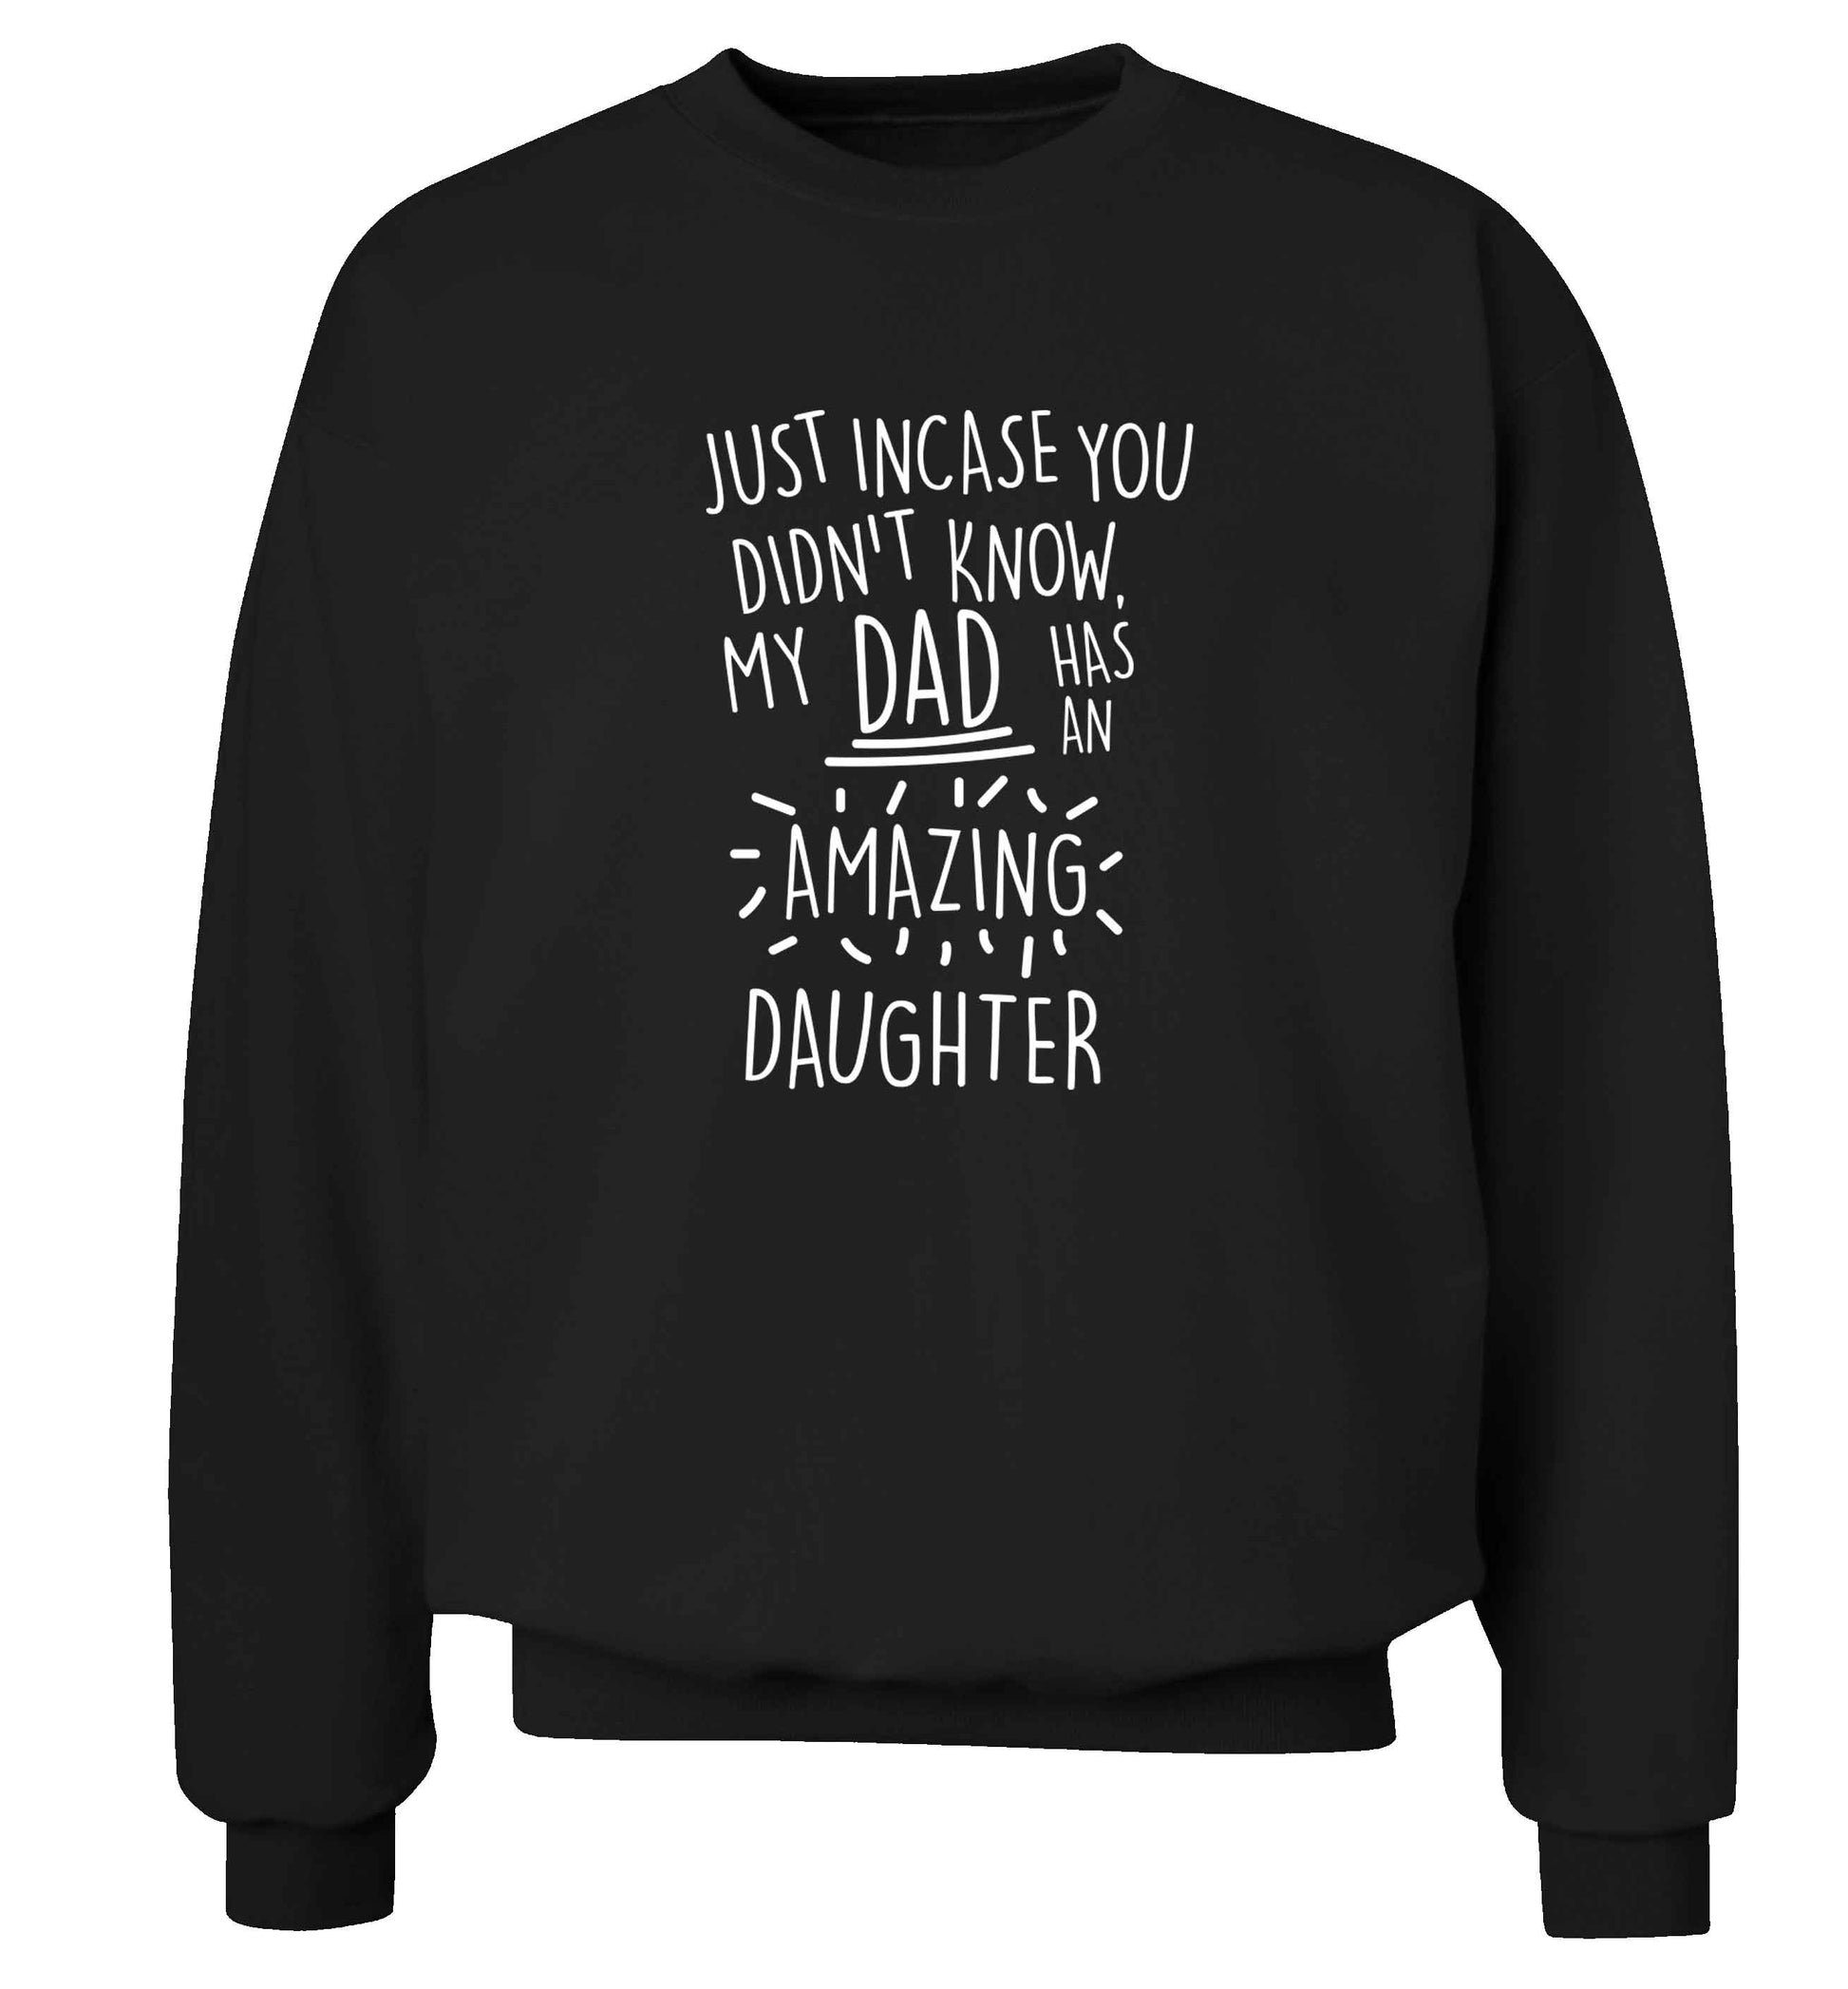 Just incase you didn't know my dad has an amazing daughter adult's unisex black sweater 2XL